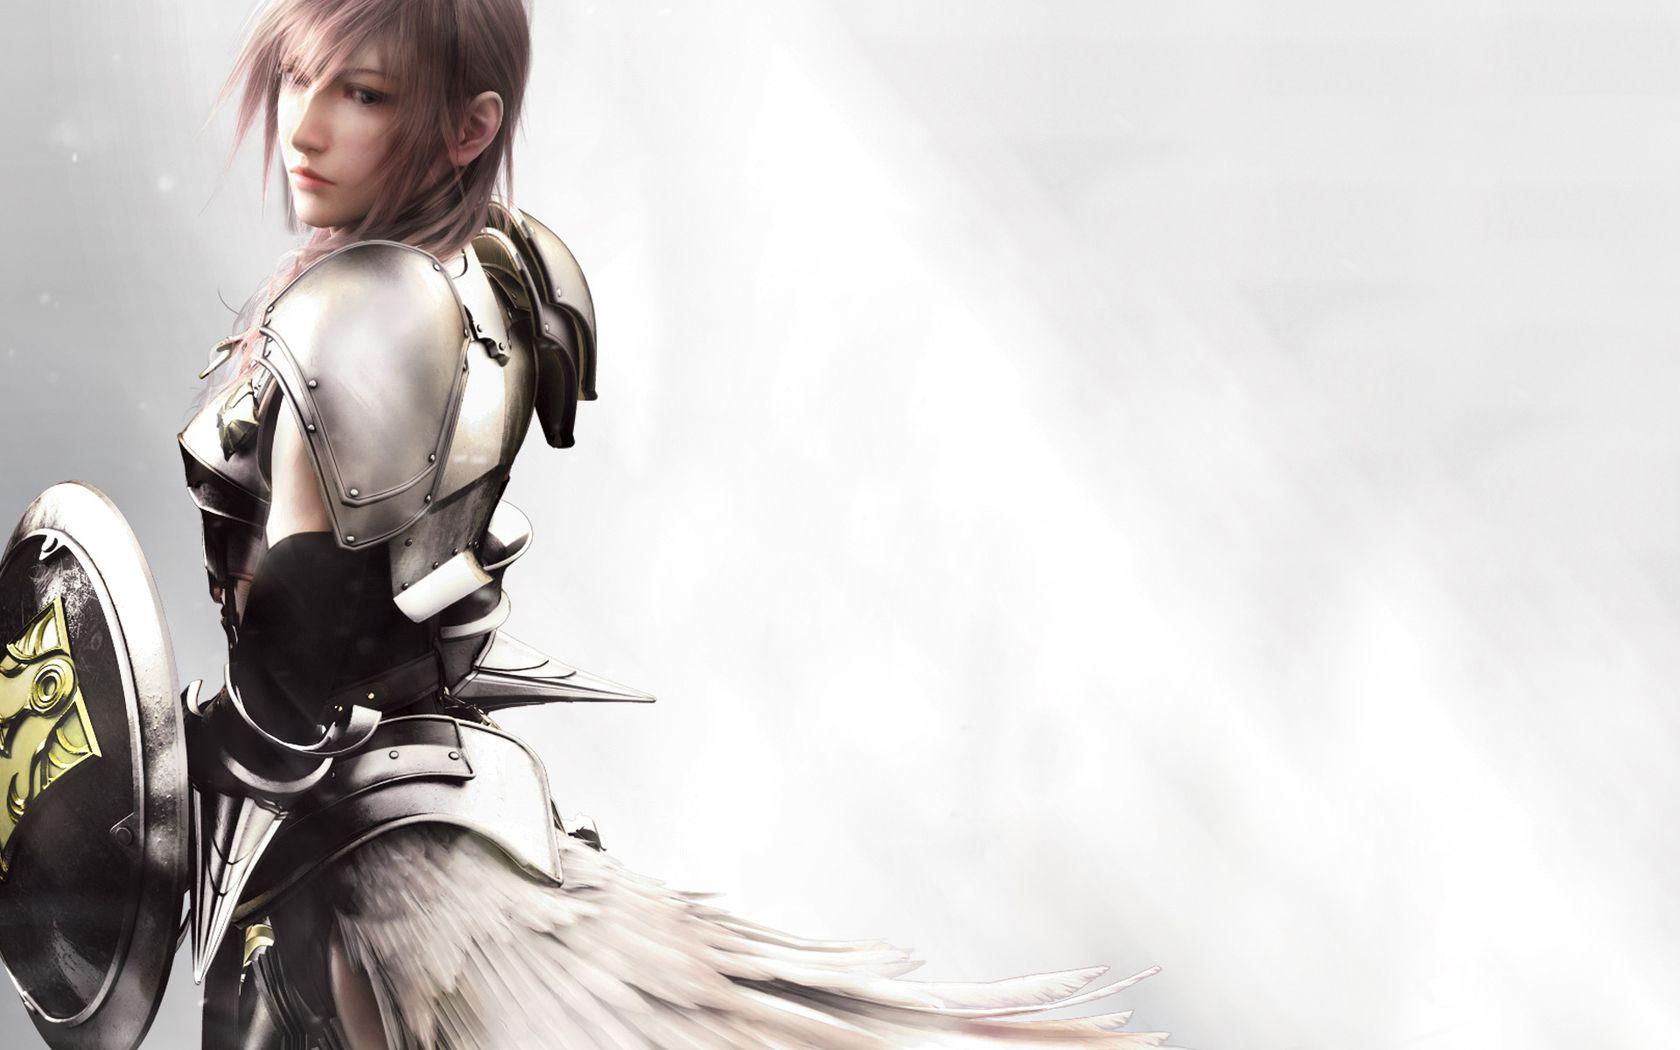 Final Fantasy 13 Wallpapers Top Free Final Fantasy 13 Backgrounds Wallpaperaccess